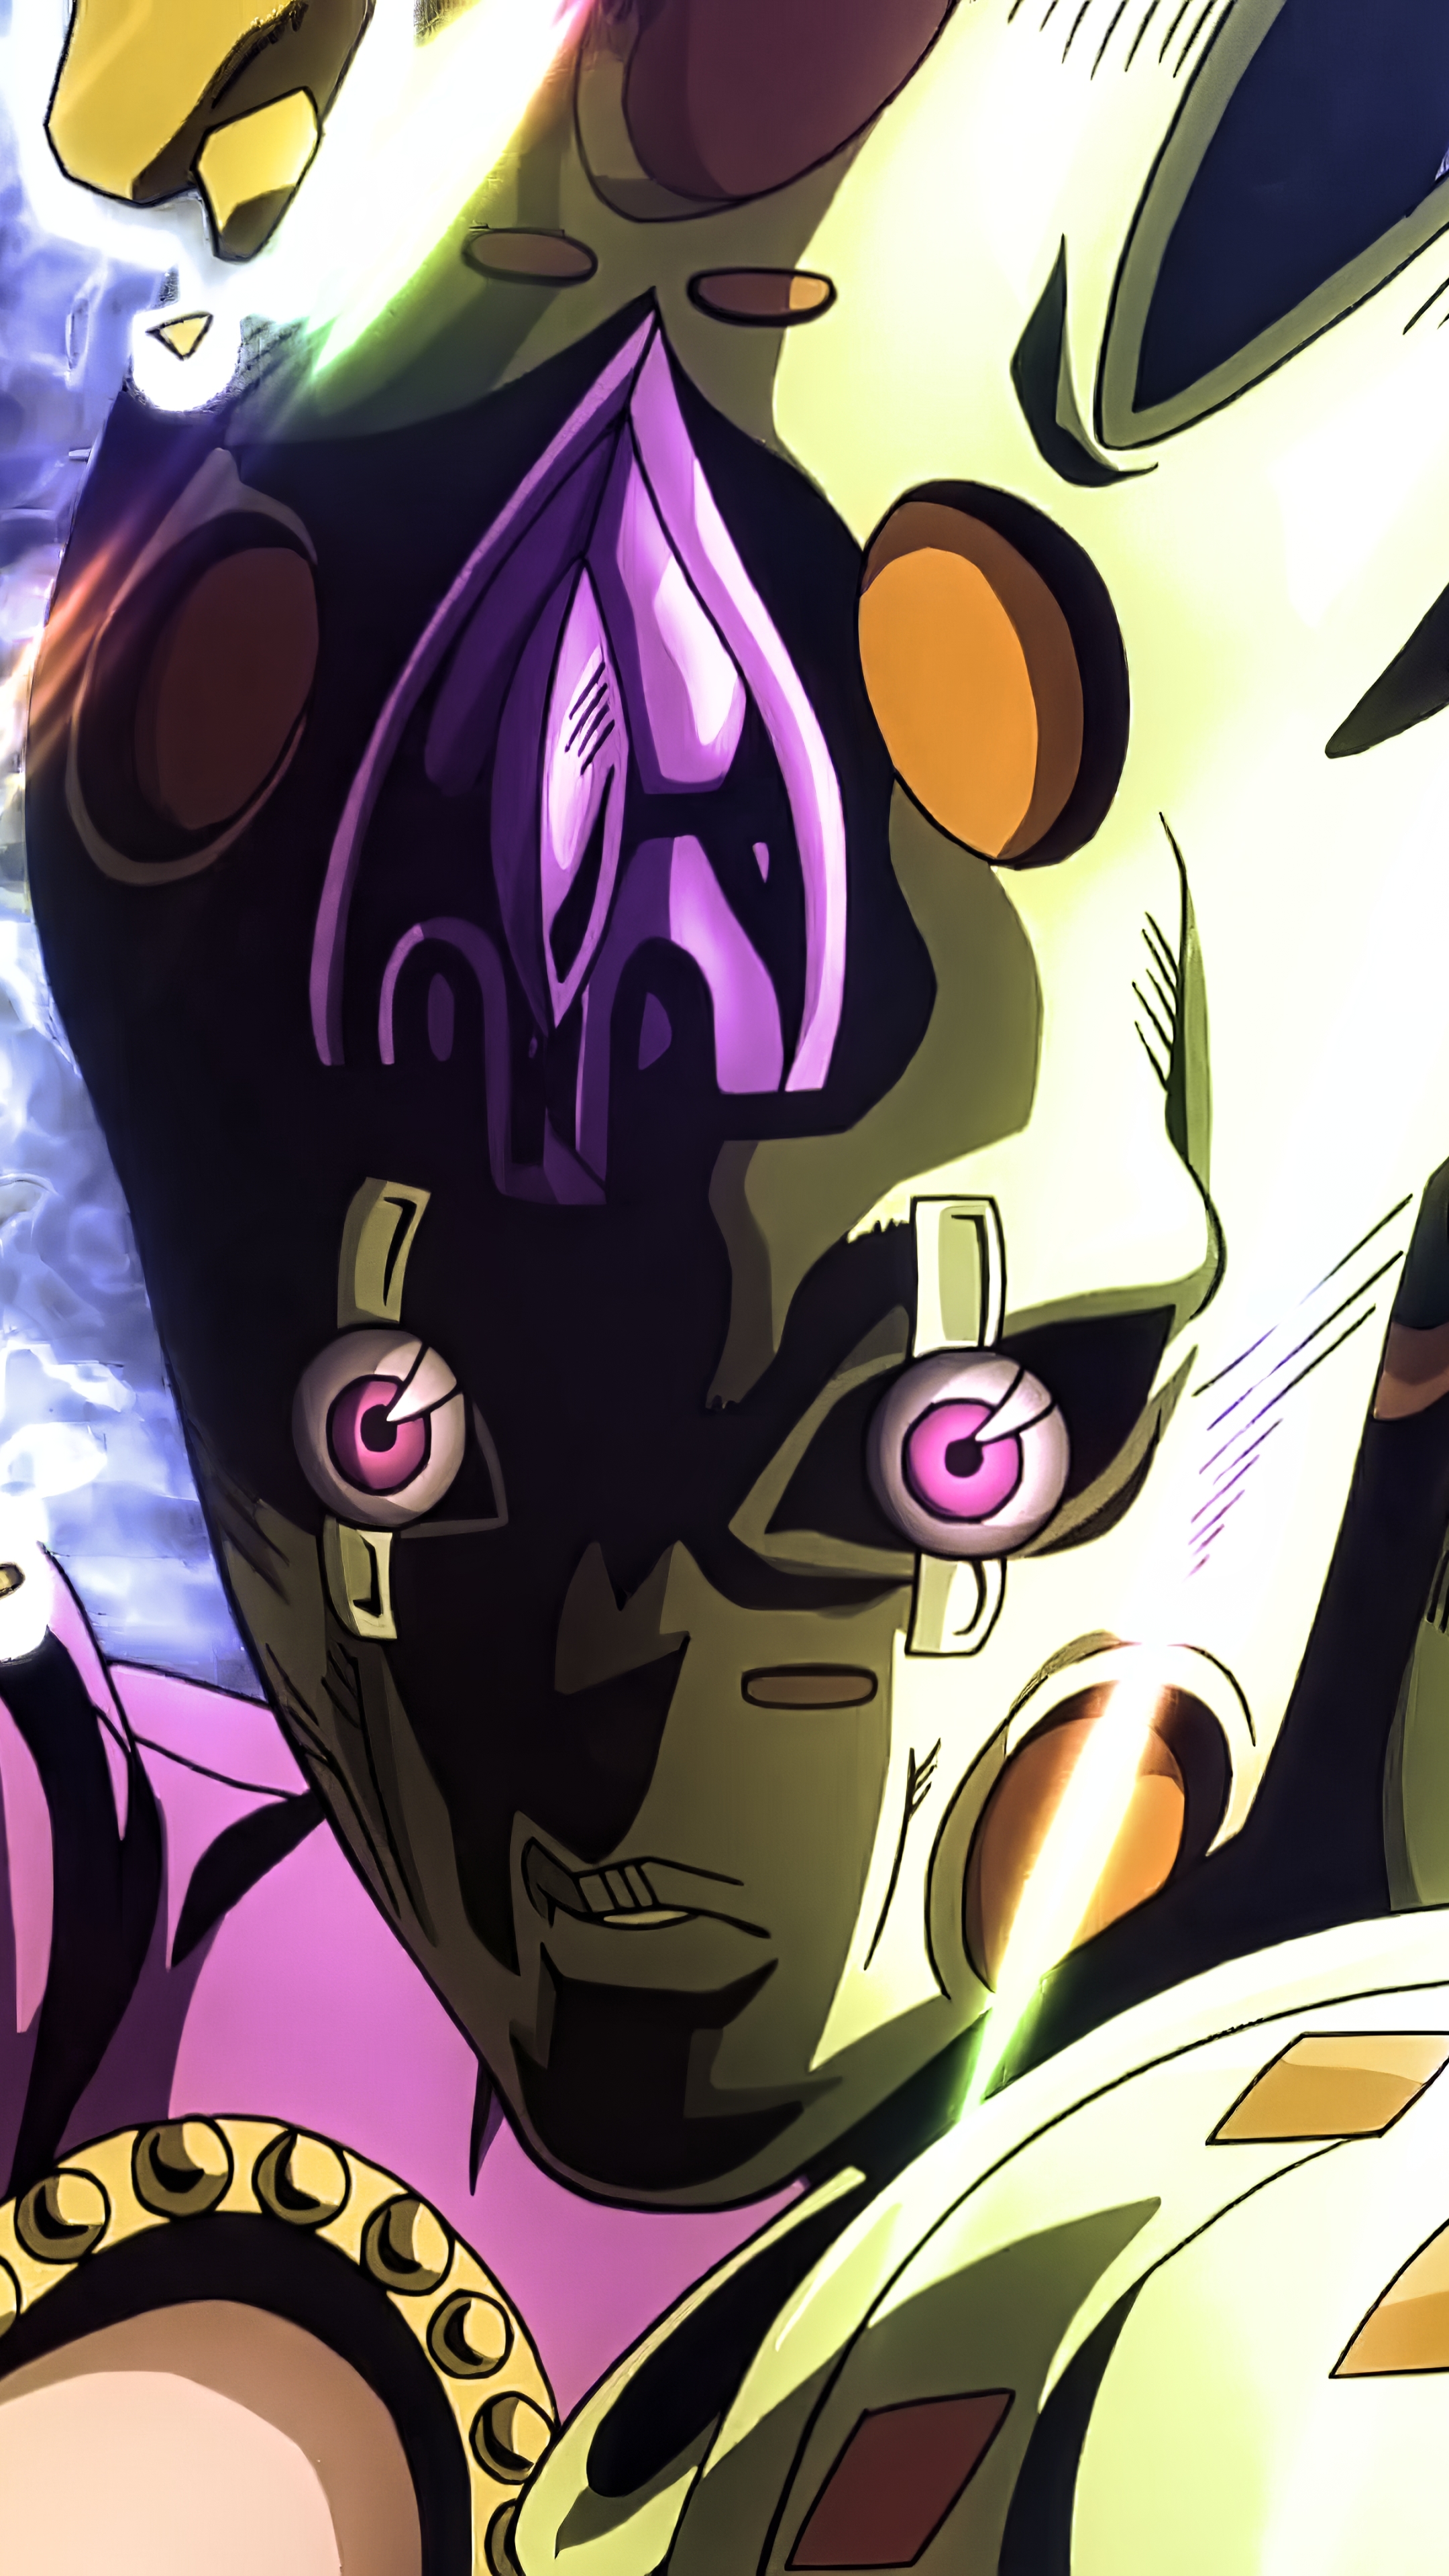 Anime Jojo S Bizarre Adventure 1080x1920 Wallpaper Id 865893 Mobile Abyss Giorno fusing with/ turning into gold experience requiem. anime jojo s bizarre adventure